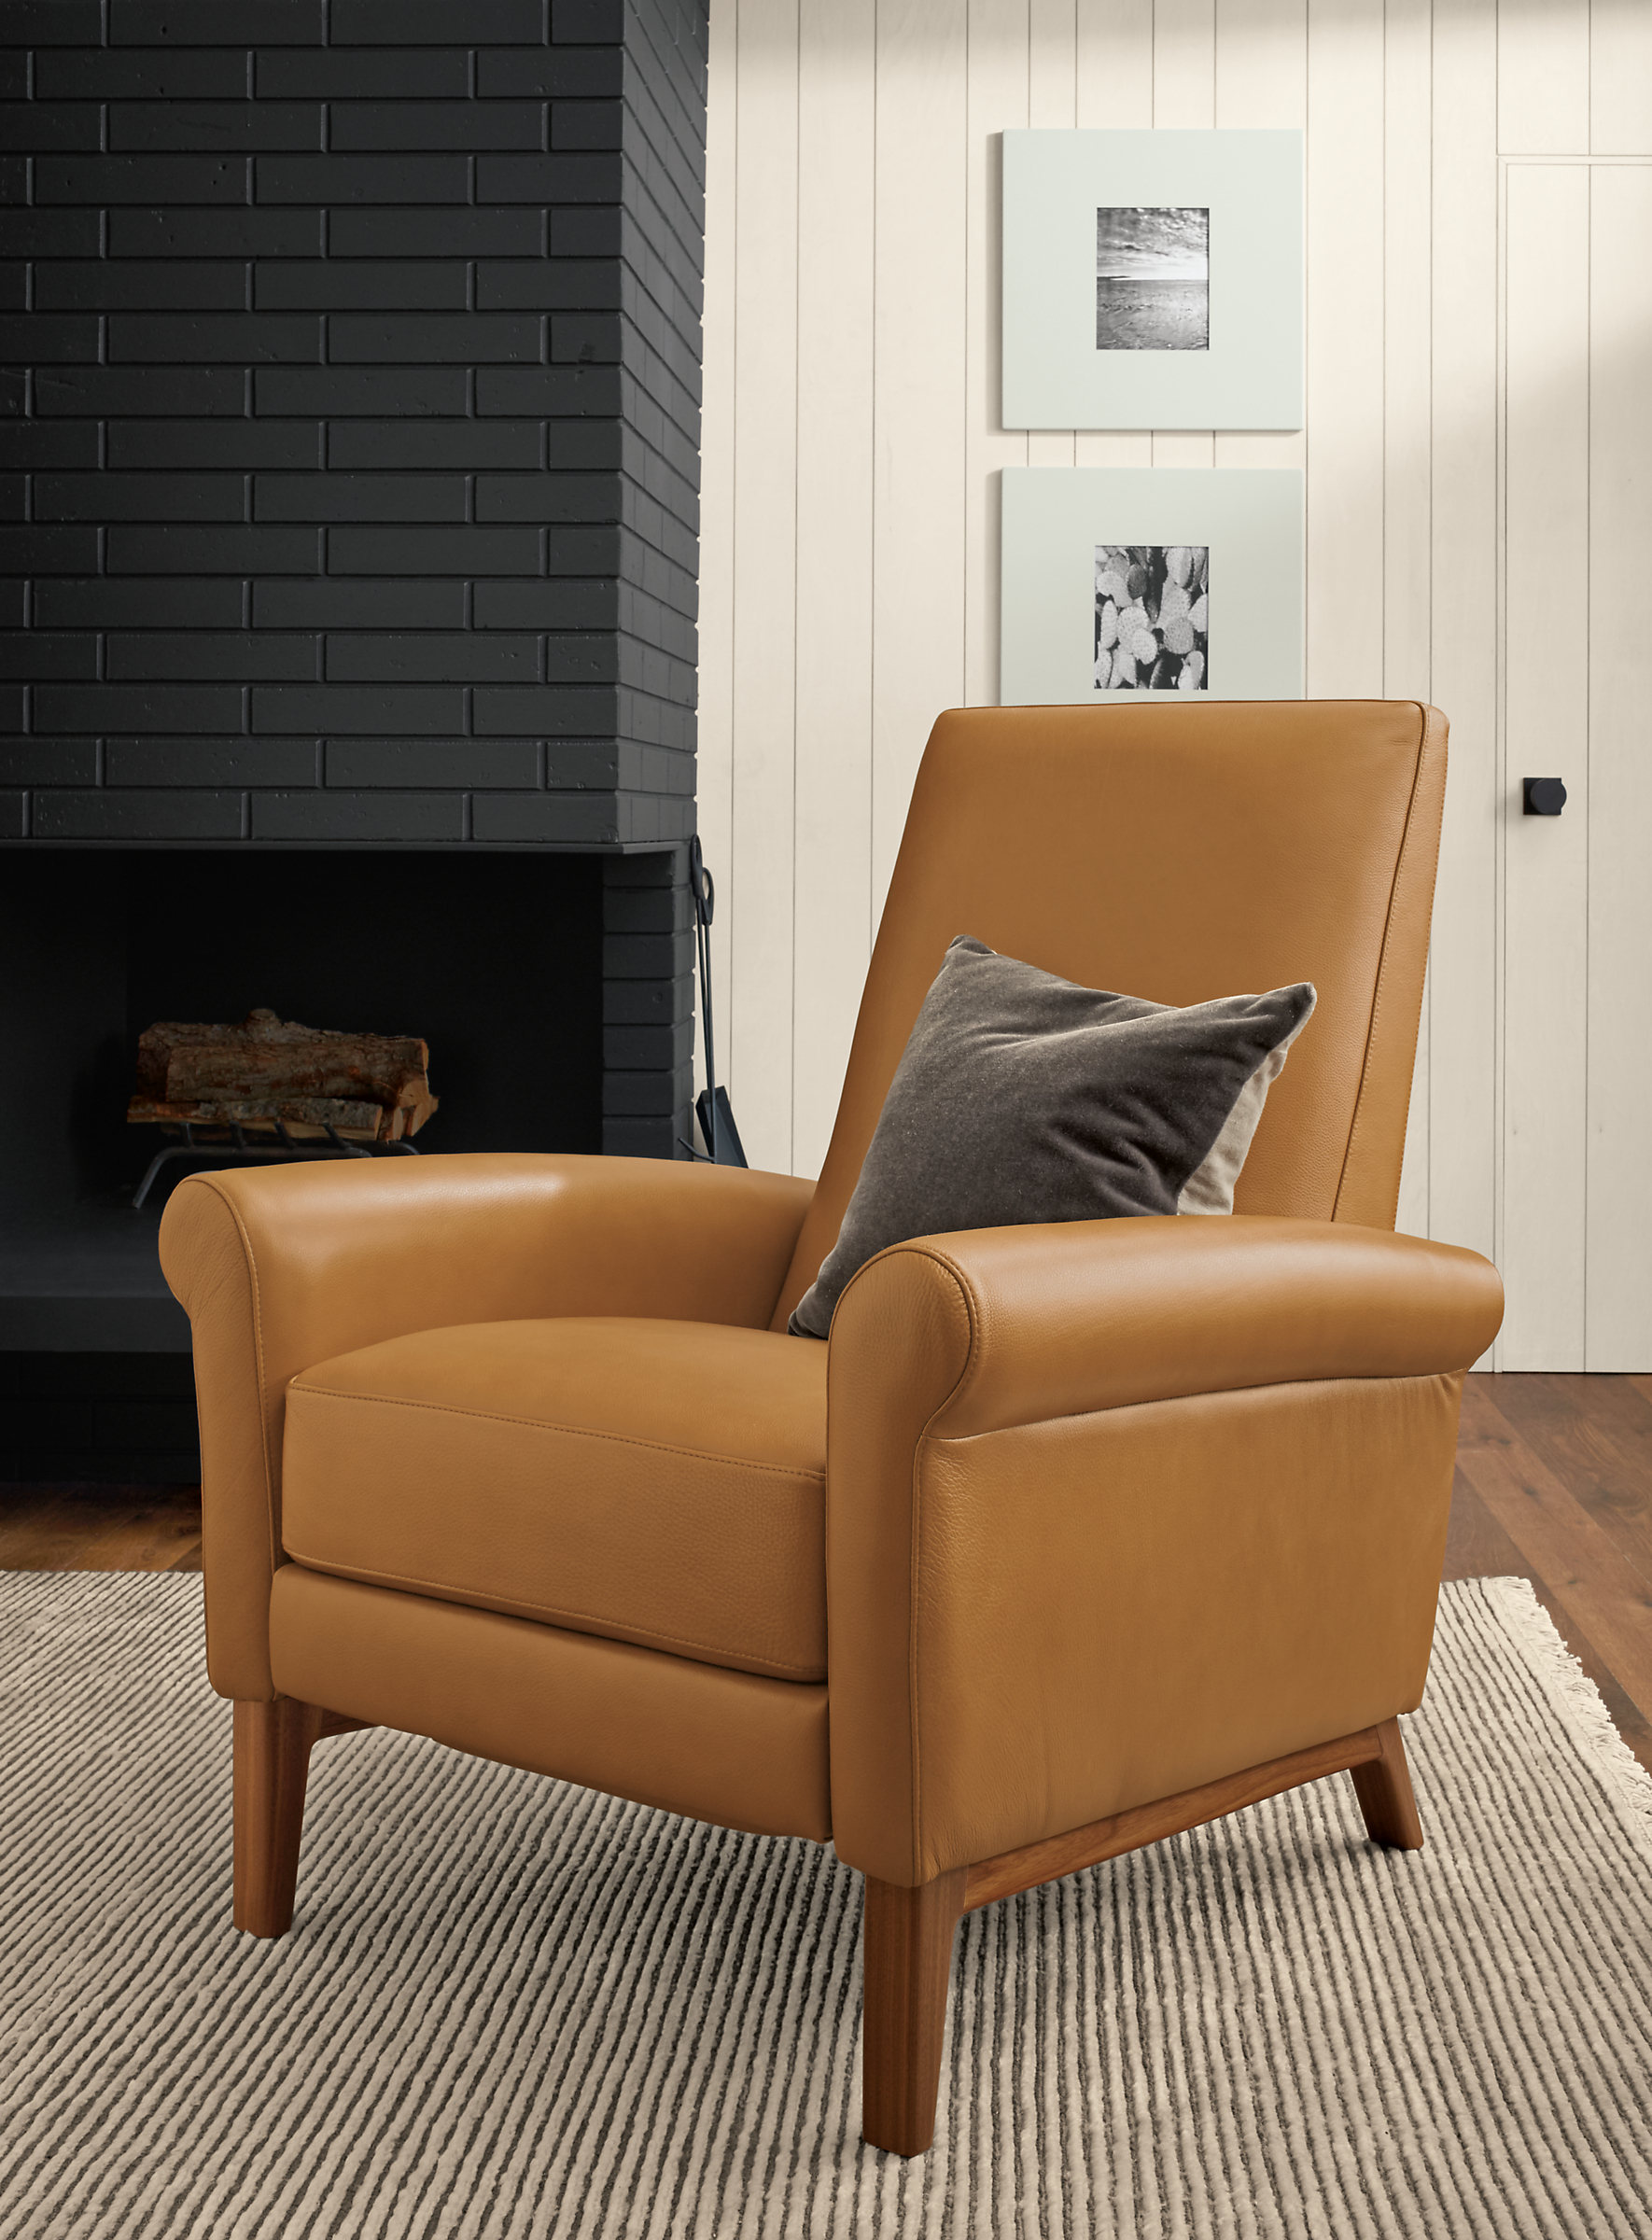 Detail of Arlo recliner in Lecco camel leather with walnut base.